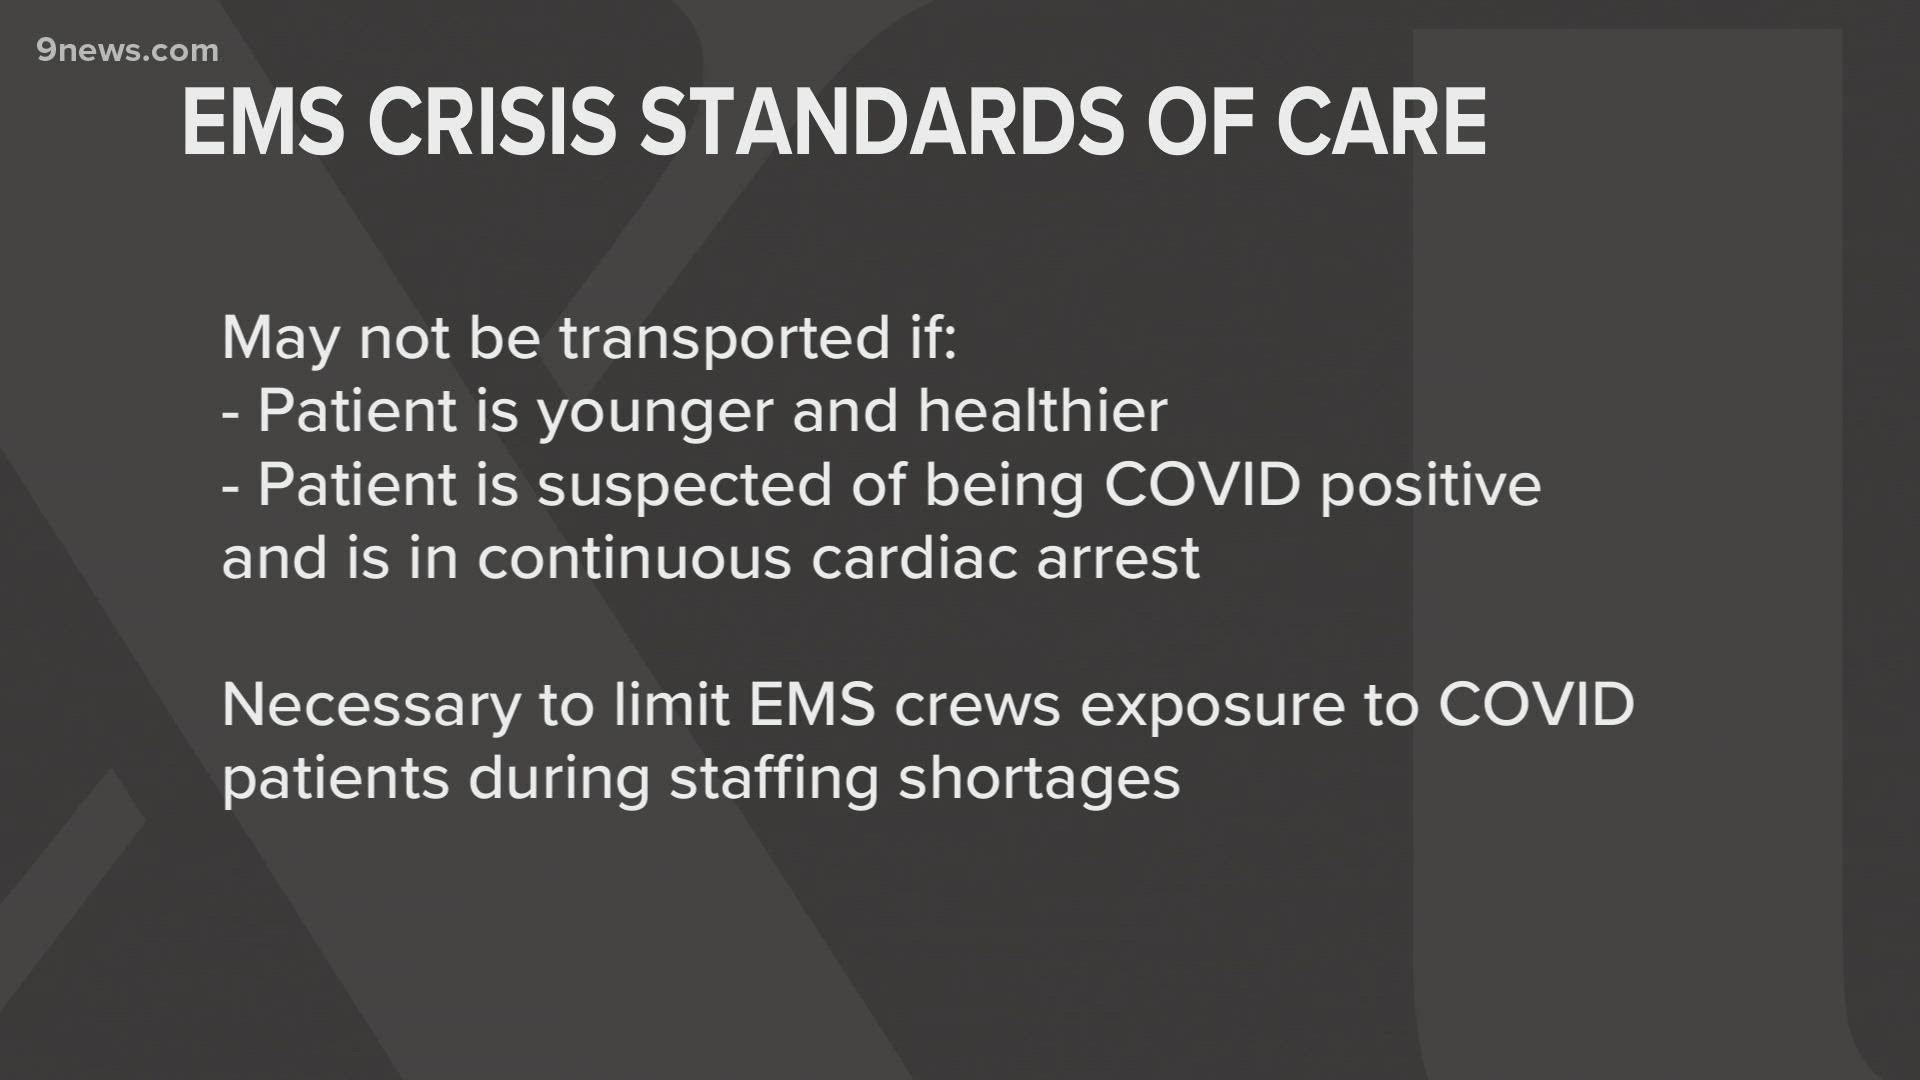 Colorado activated "crisis standards of care" for EMS due to a COVID-19 surge, affecting when ambulances are dispatched and who they transport.